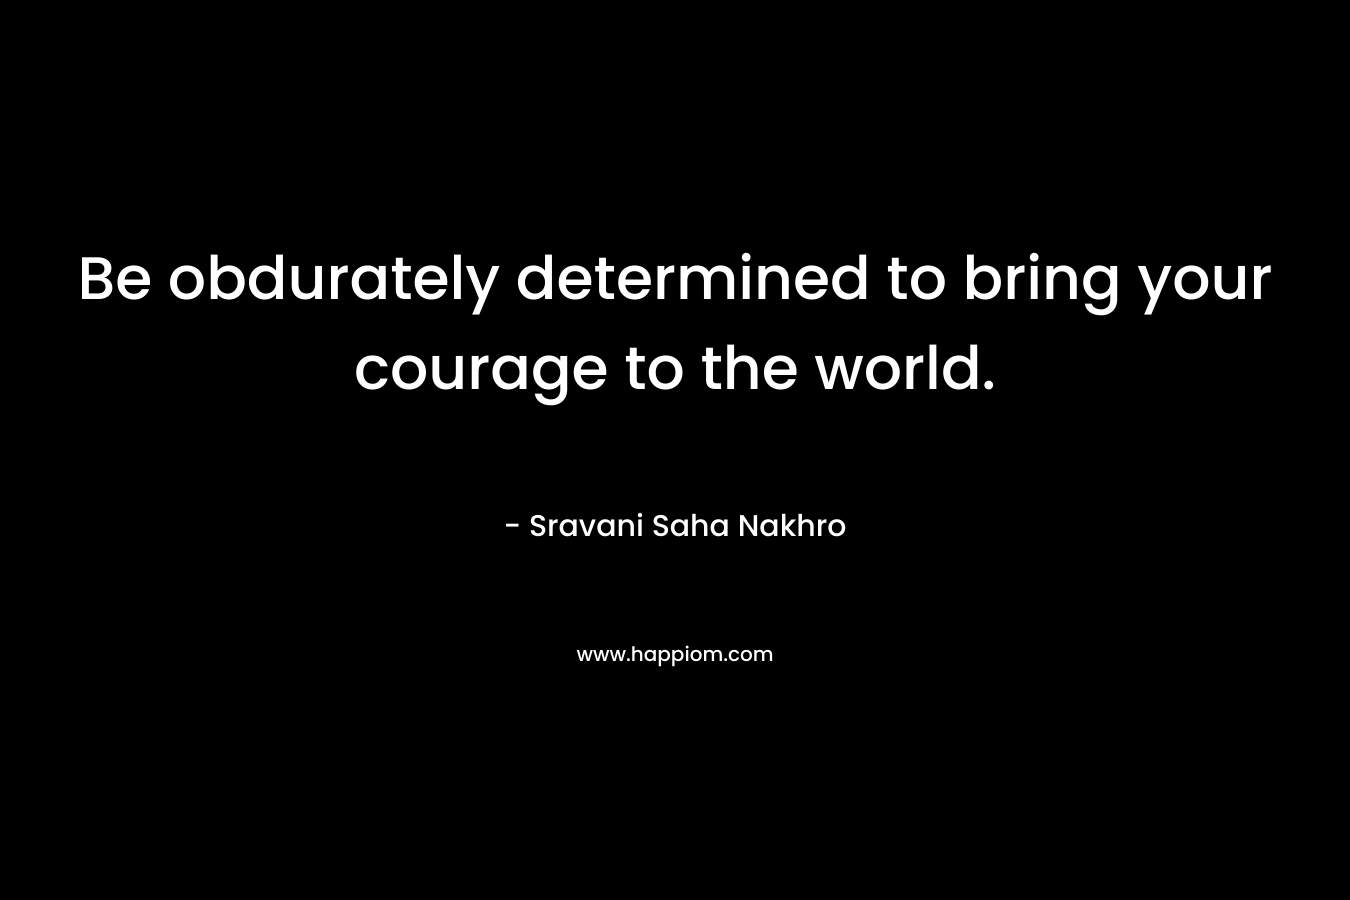 Be obdurately determined to bring your courage to the world.